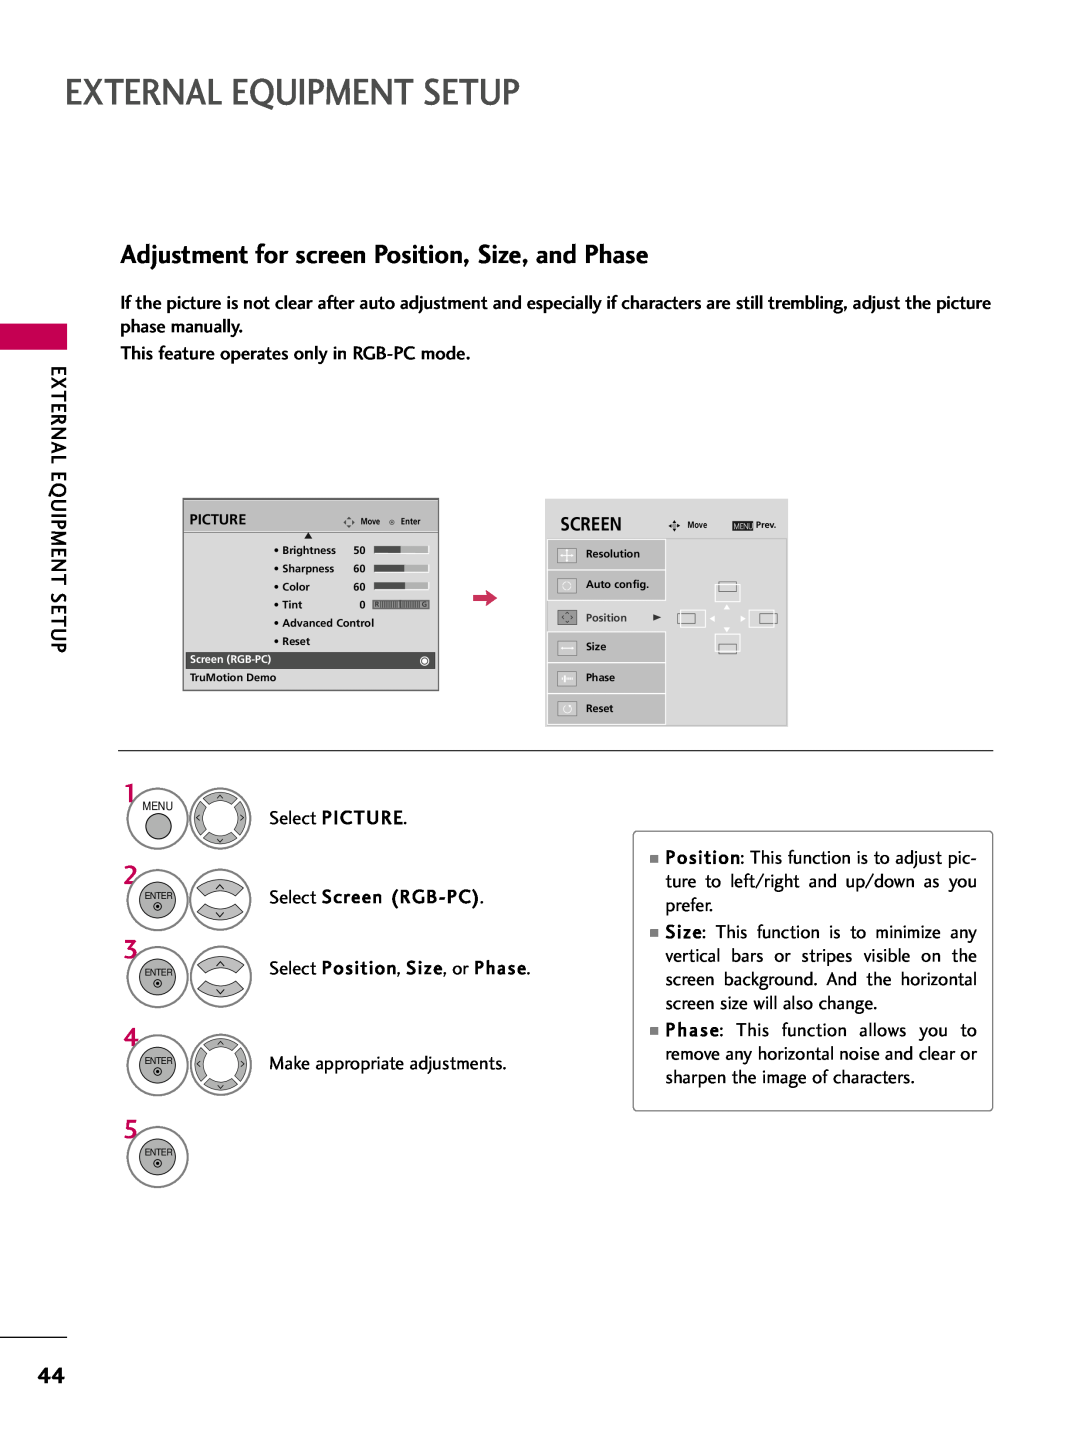 LG Electronics 4260, 60PG60, 5270, 5260 Adjustment for screen Position, Size, and Phase, External Equipment Setup, Screen 